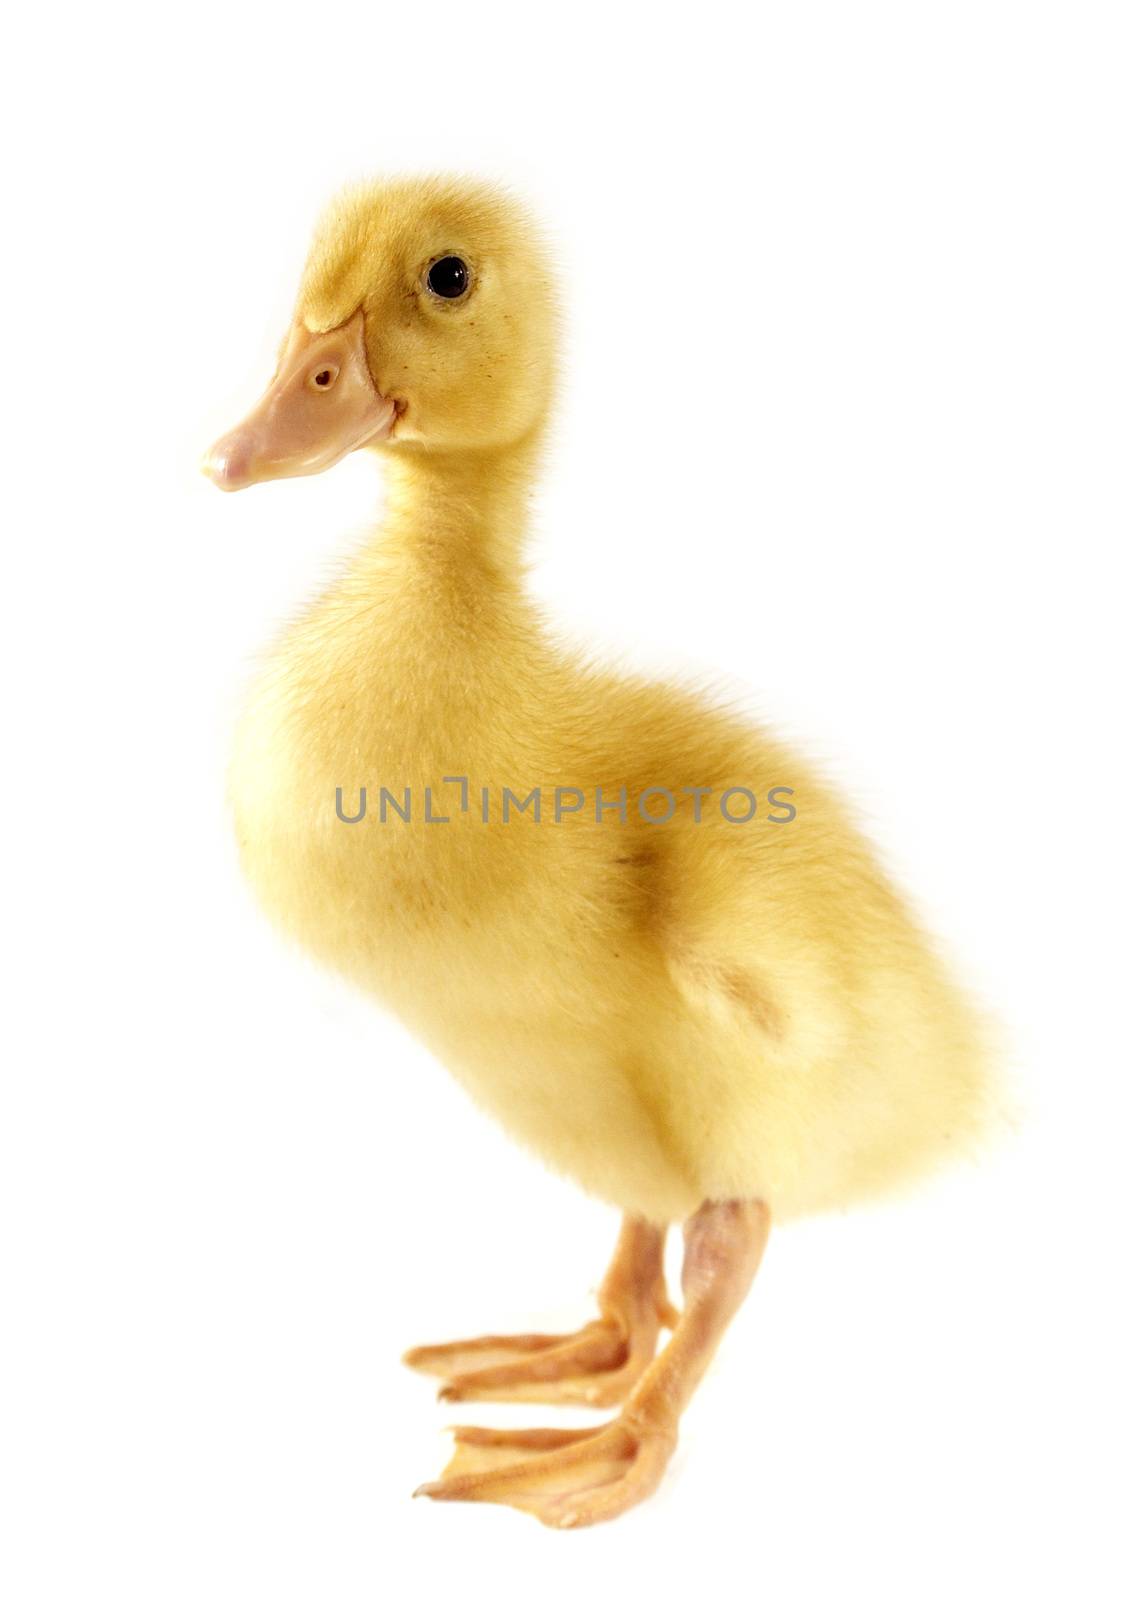 Funny yellow Duckling by designsstock